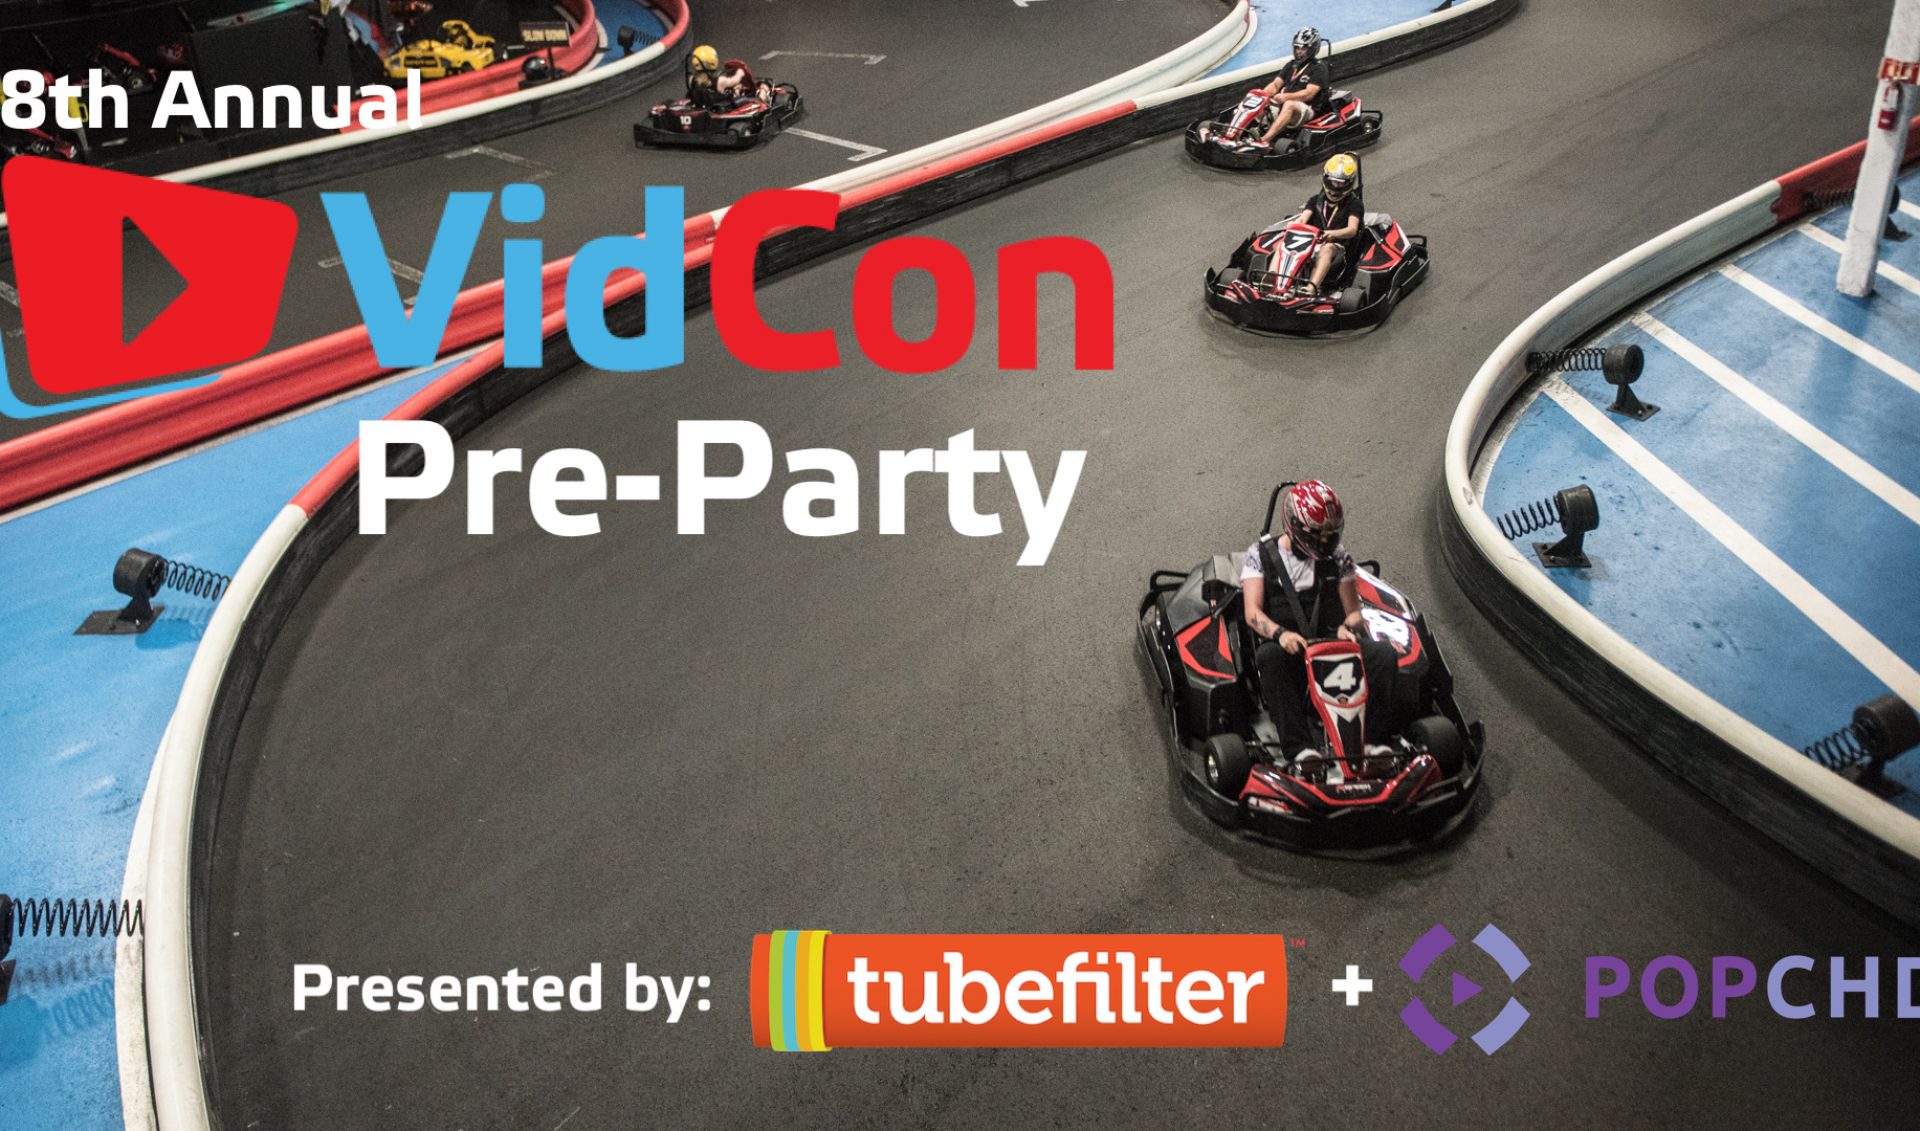 Donut Media Is Giving You Free Racing At Tubefilter’s 8th Annual VidCon Pre-Party